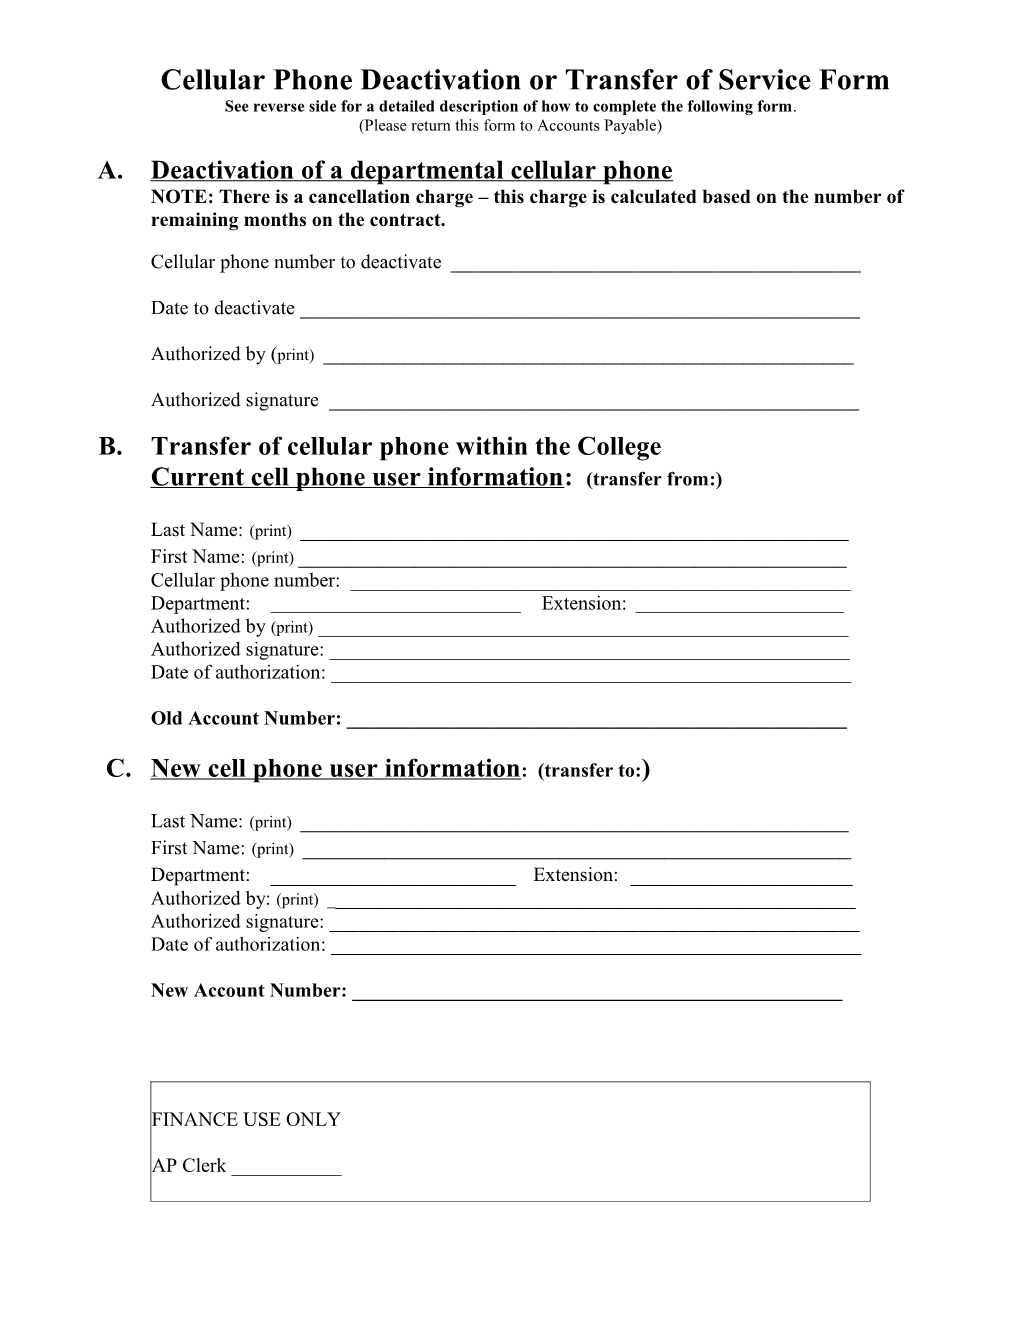 Cellular Phone Request Form